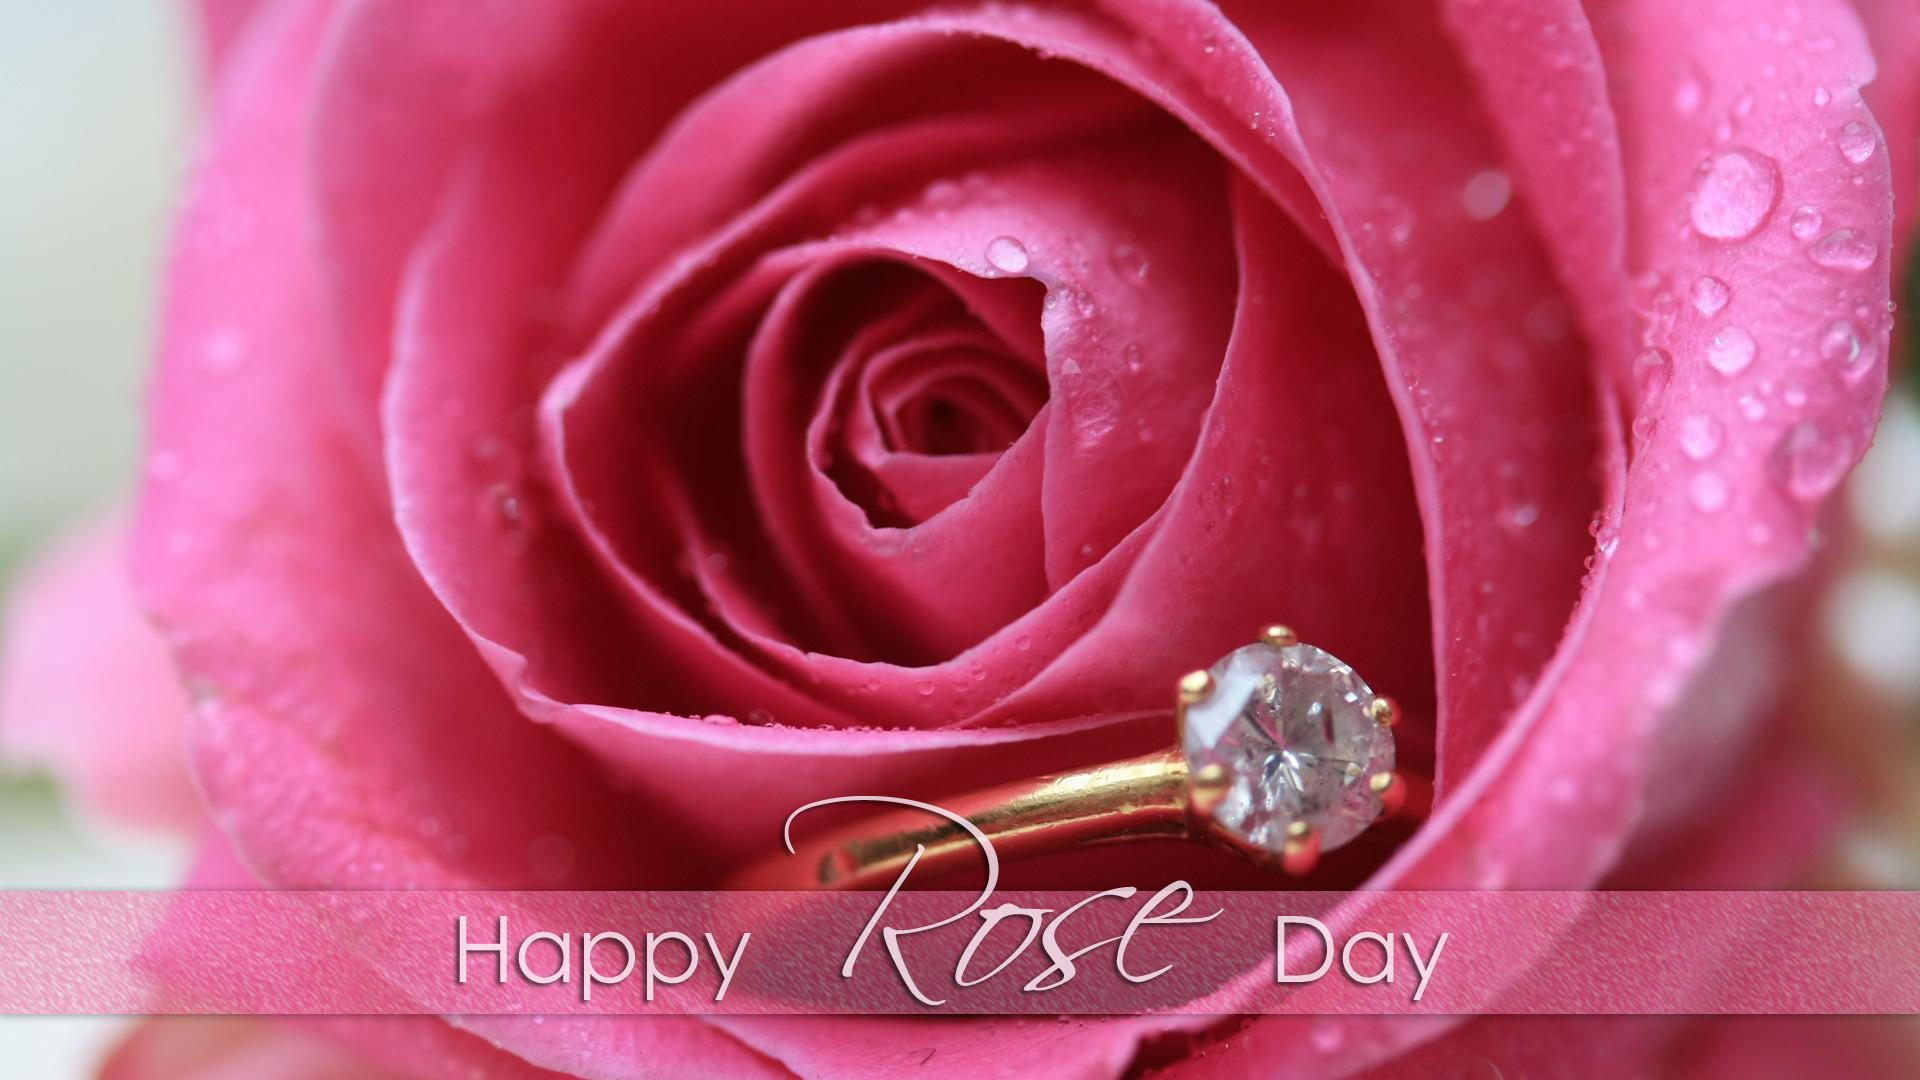 Rose Day Images for Whatsapp DP, Profile Wallpapers – Free Download 4